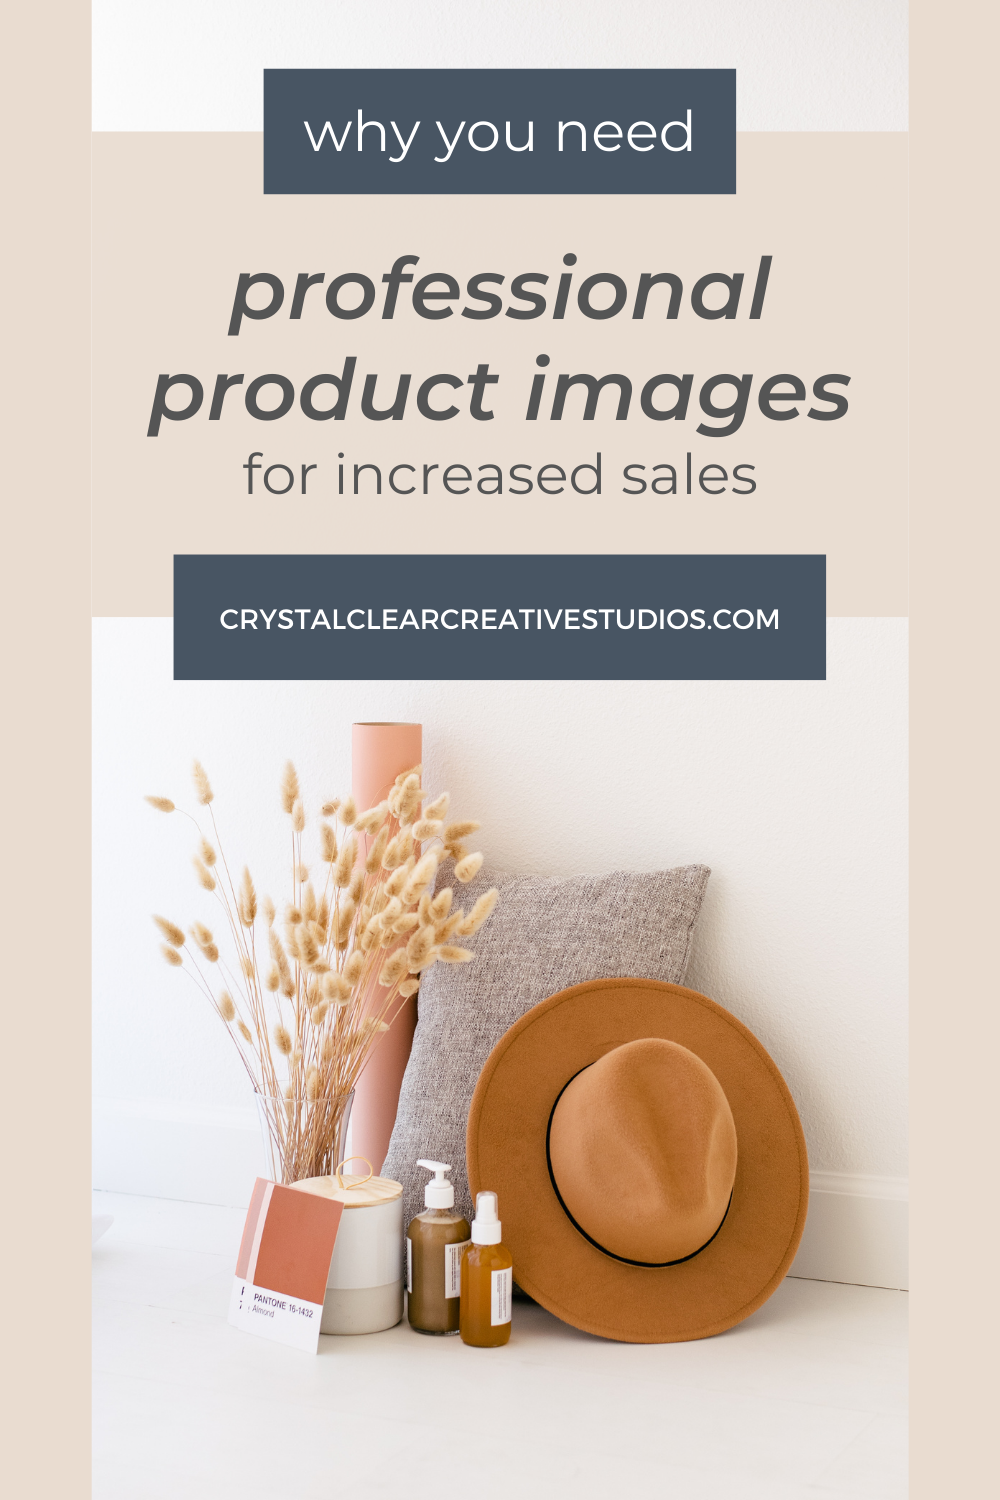 2-Reasons-Your-Products-Need-a-Professional-Photographer